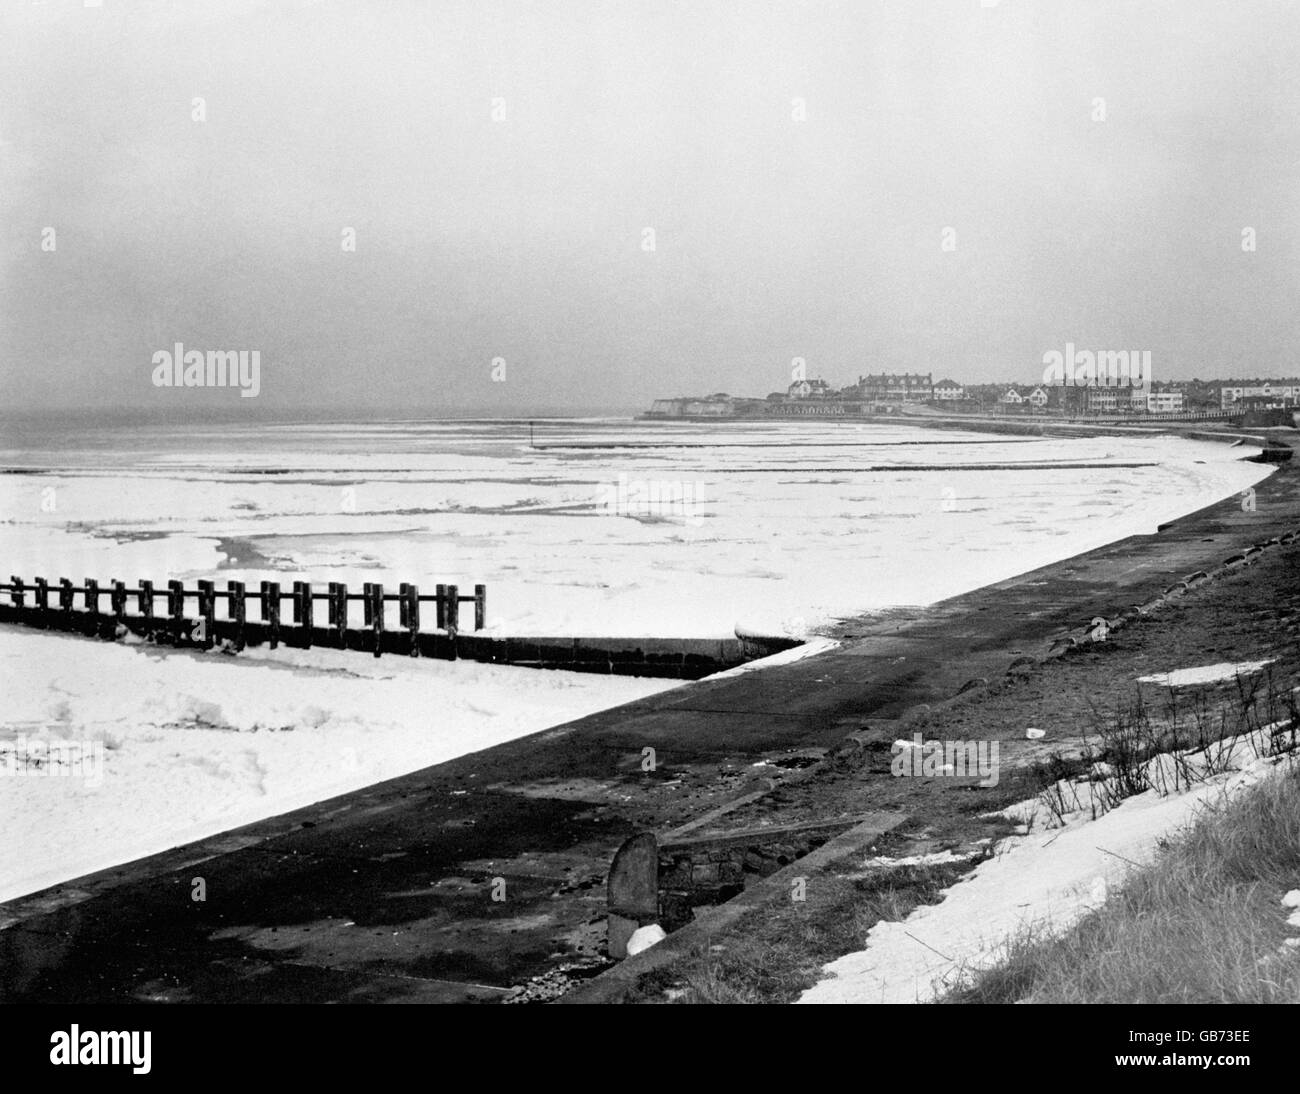 Even the sea has frozen solid in Kent in the current bitterly cold spell. This was the scene at Minnis Bay, near Margate. The sea was frozen for 3 miles along the shore, a quarter of a mile out. Stock Photo